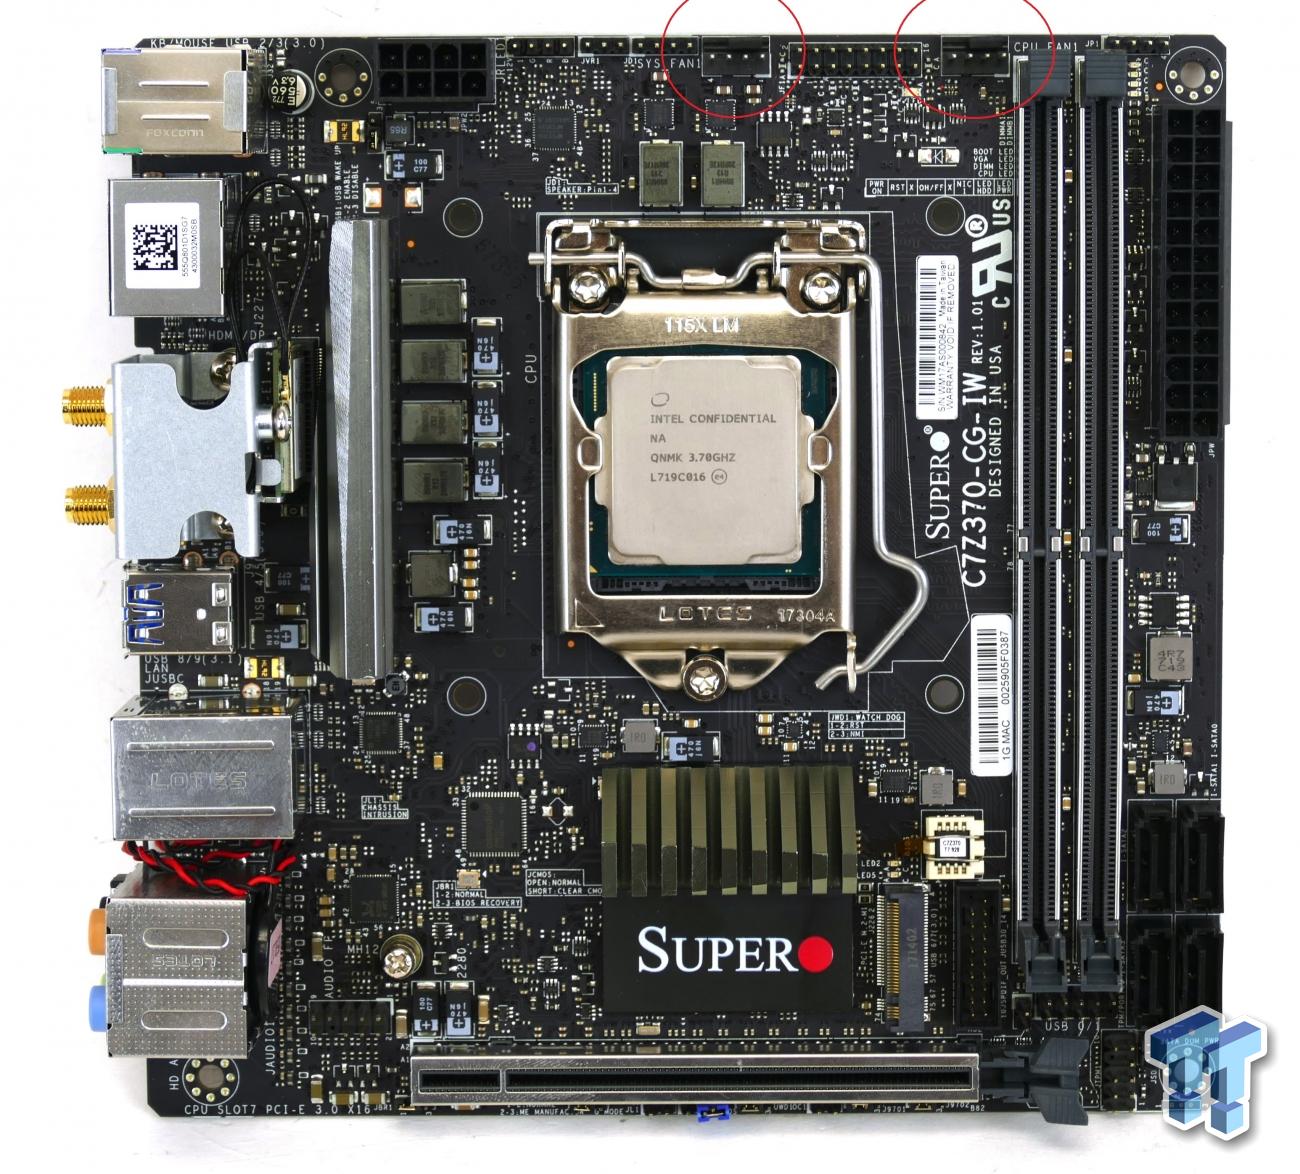 SuperMicro C7Z370-CG-IW (Intel Z370) Motherboard Review 